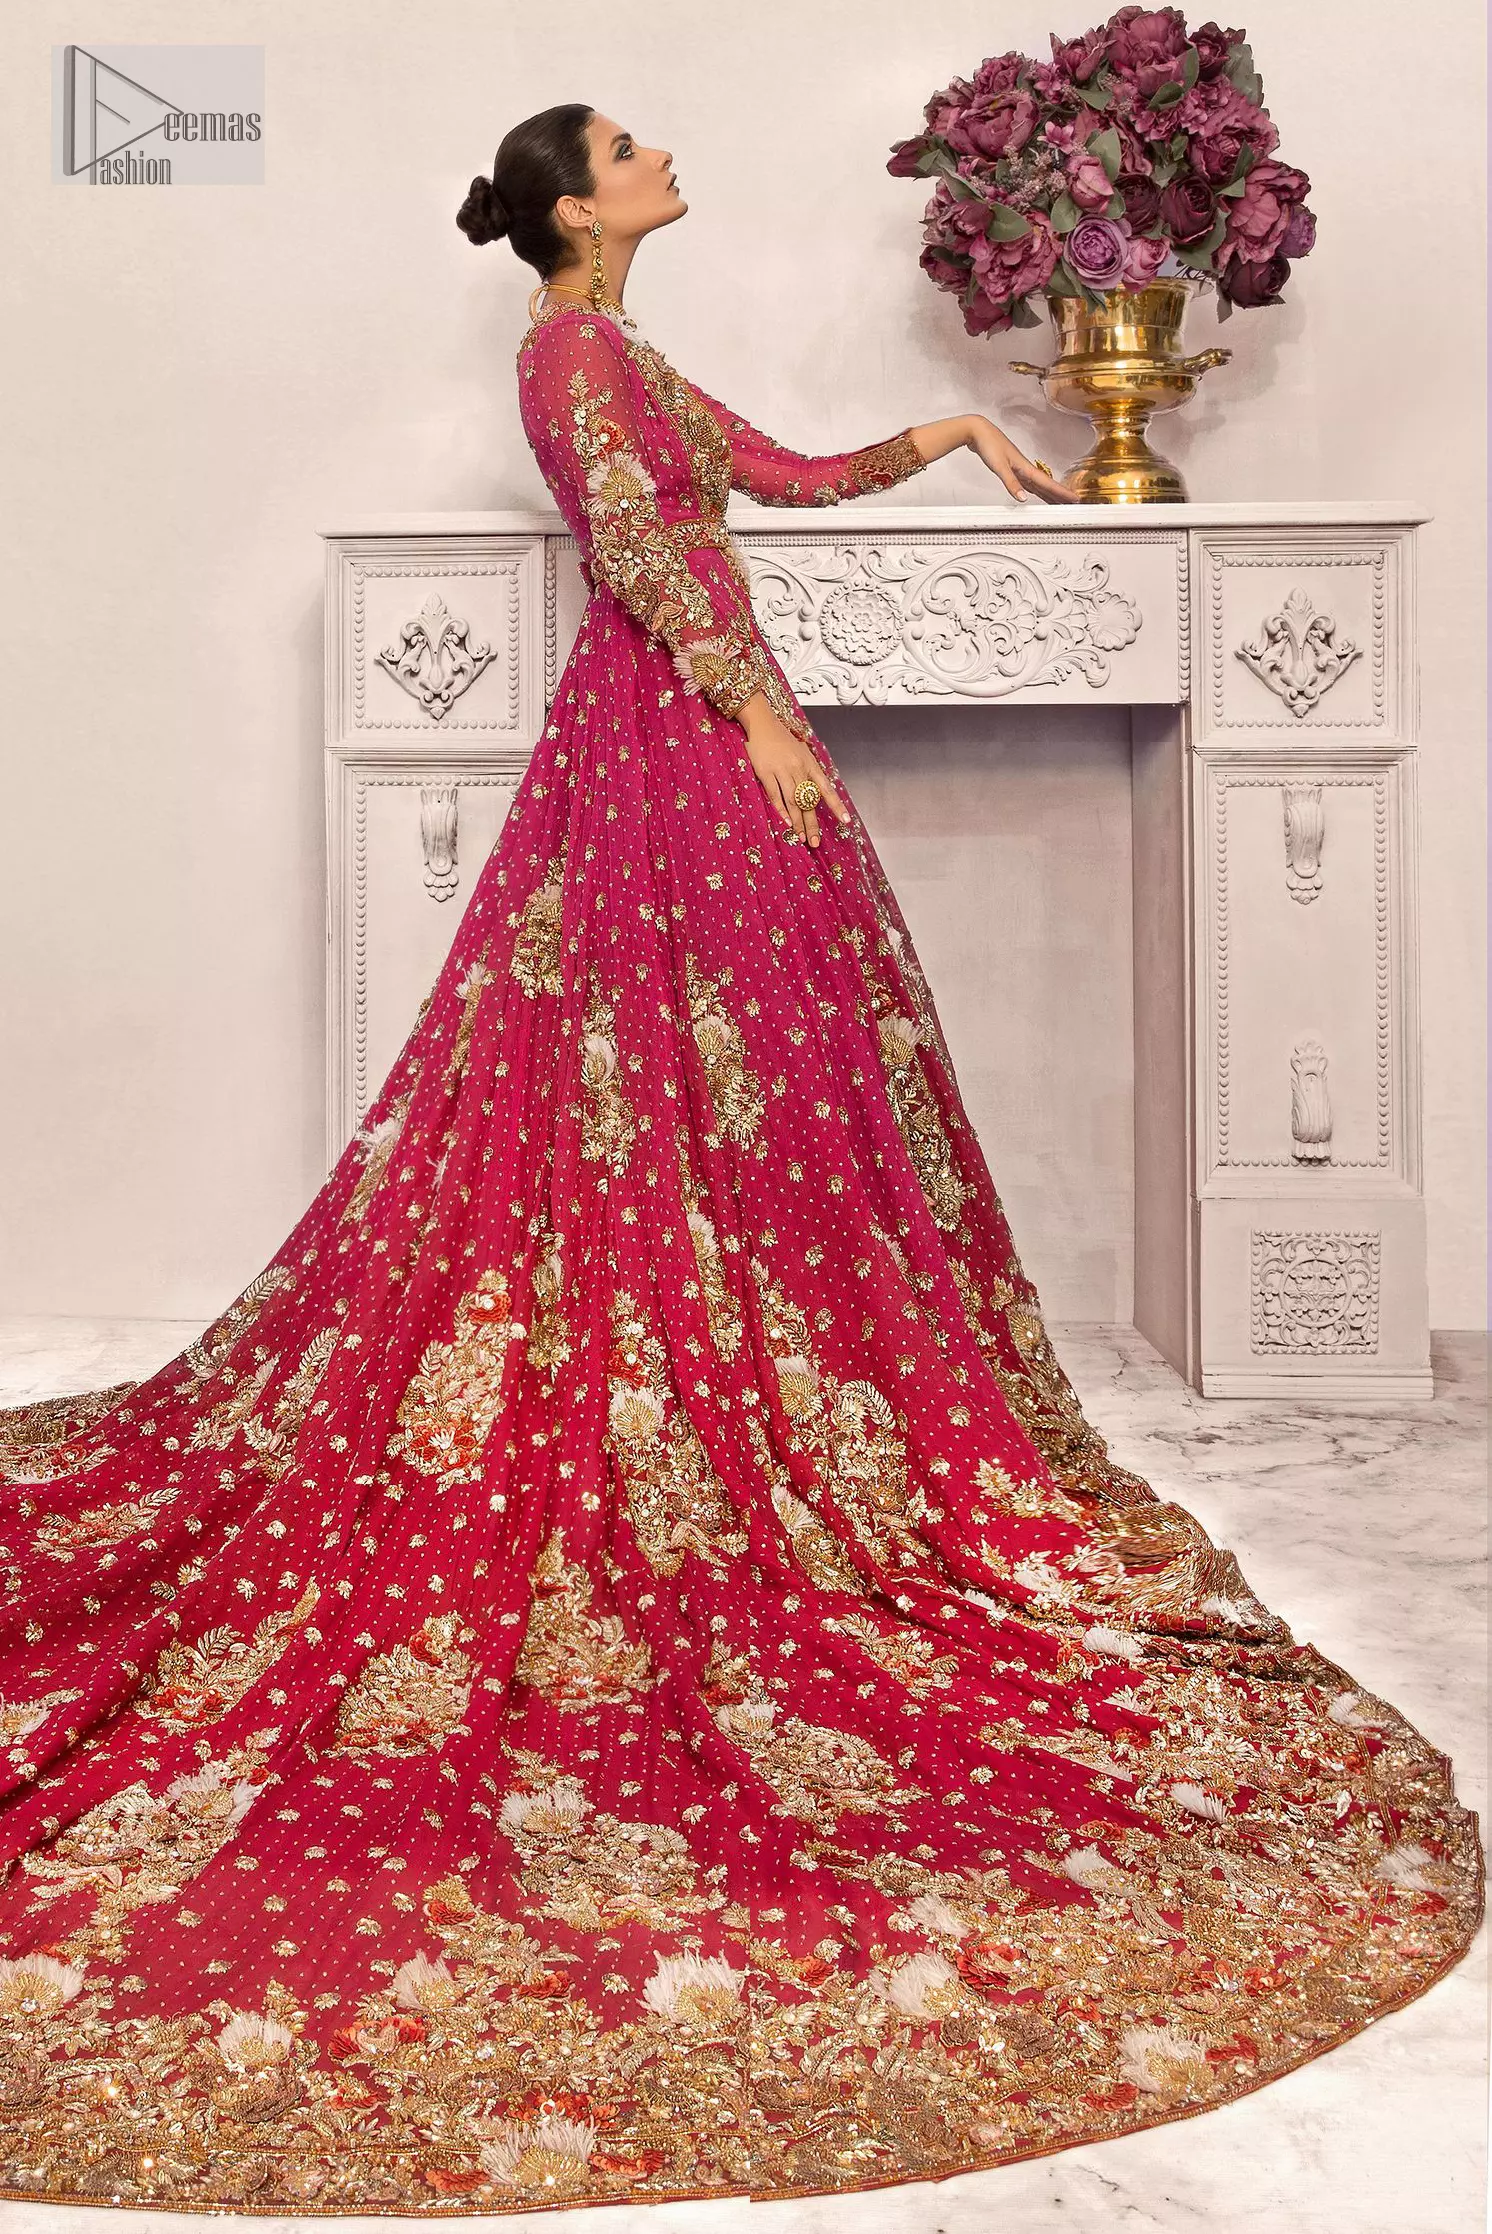 A maxi in a beautiful shade of shocking pink is deftly adorned with glowing tilla, dabka and pearls making this ensemble truly ethereal and incandescent. The following maxi is further enhanced with golden embroidery and laden with heavy floral motifs. The strapless neckline of the back train maxi also added more beauty to the outfit when comes with full sleeves. It is paired up with a plain can-can lehenga in the red colour to balance the reception fairy look of the bride. Finish this article with a dupatta which is ornamented with a four-sided embroidery and spray of tiny floral motifs and sequins all over for more romanticness and charmeness.